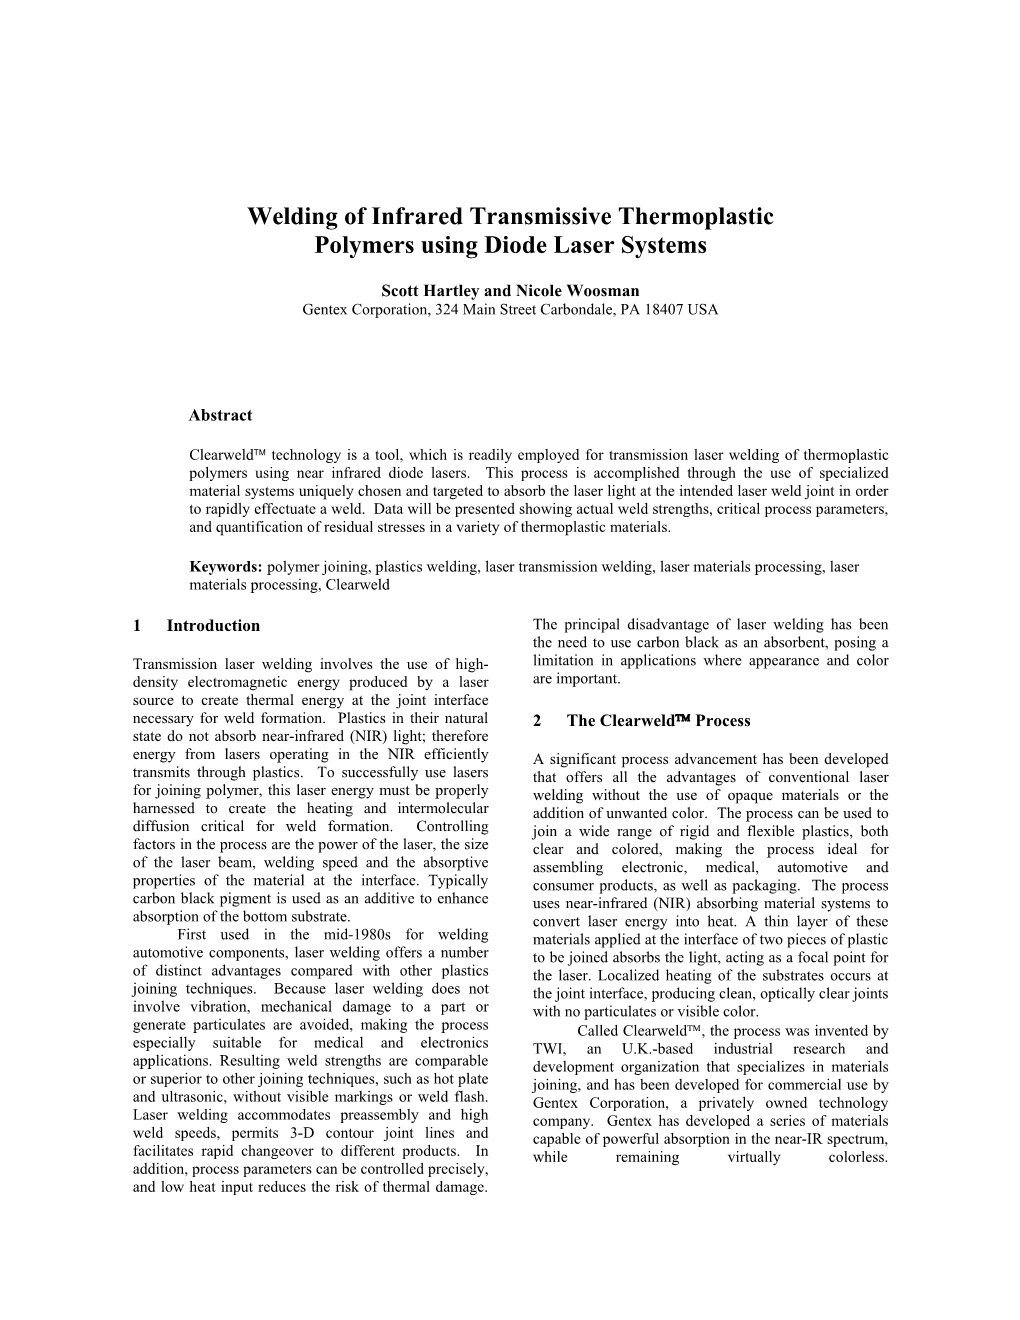 Welding of Infrared Transmissive Thermoplastic Polymers Using Diode Laser Systems